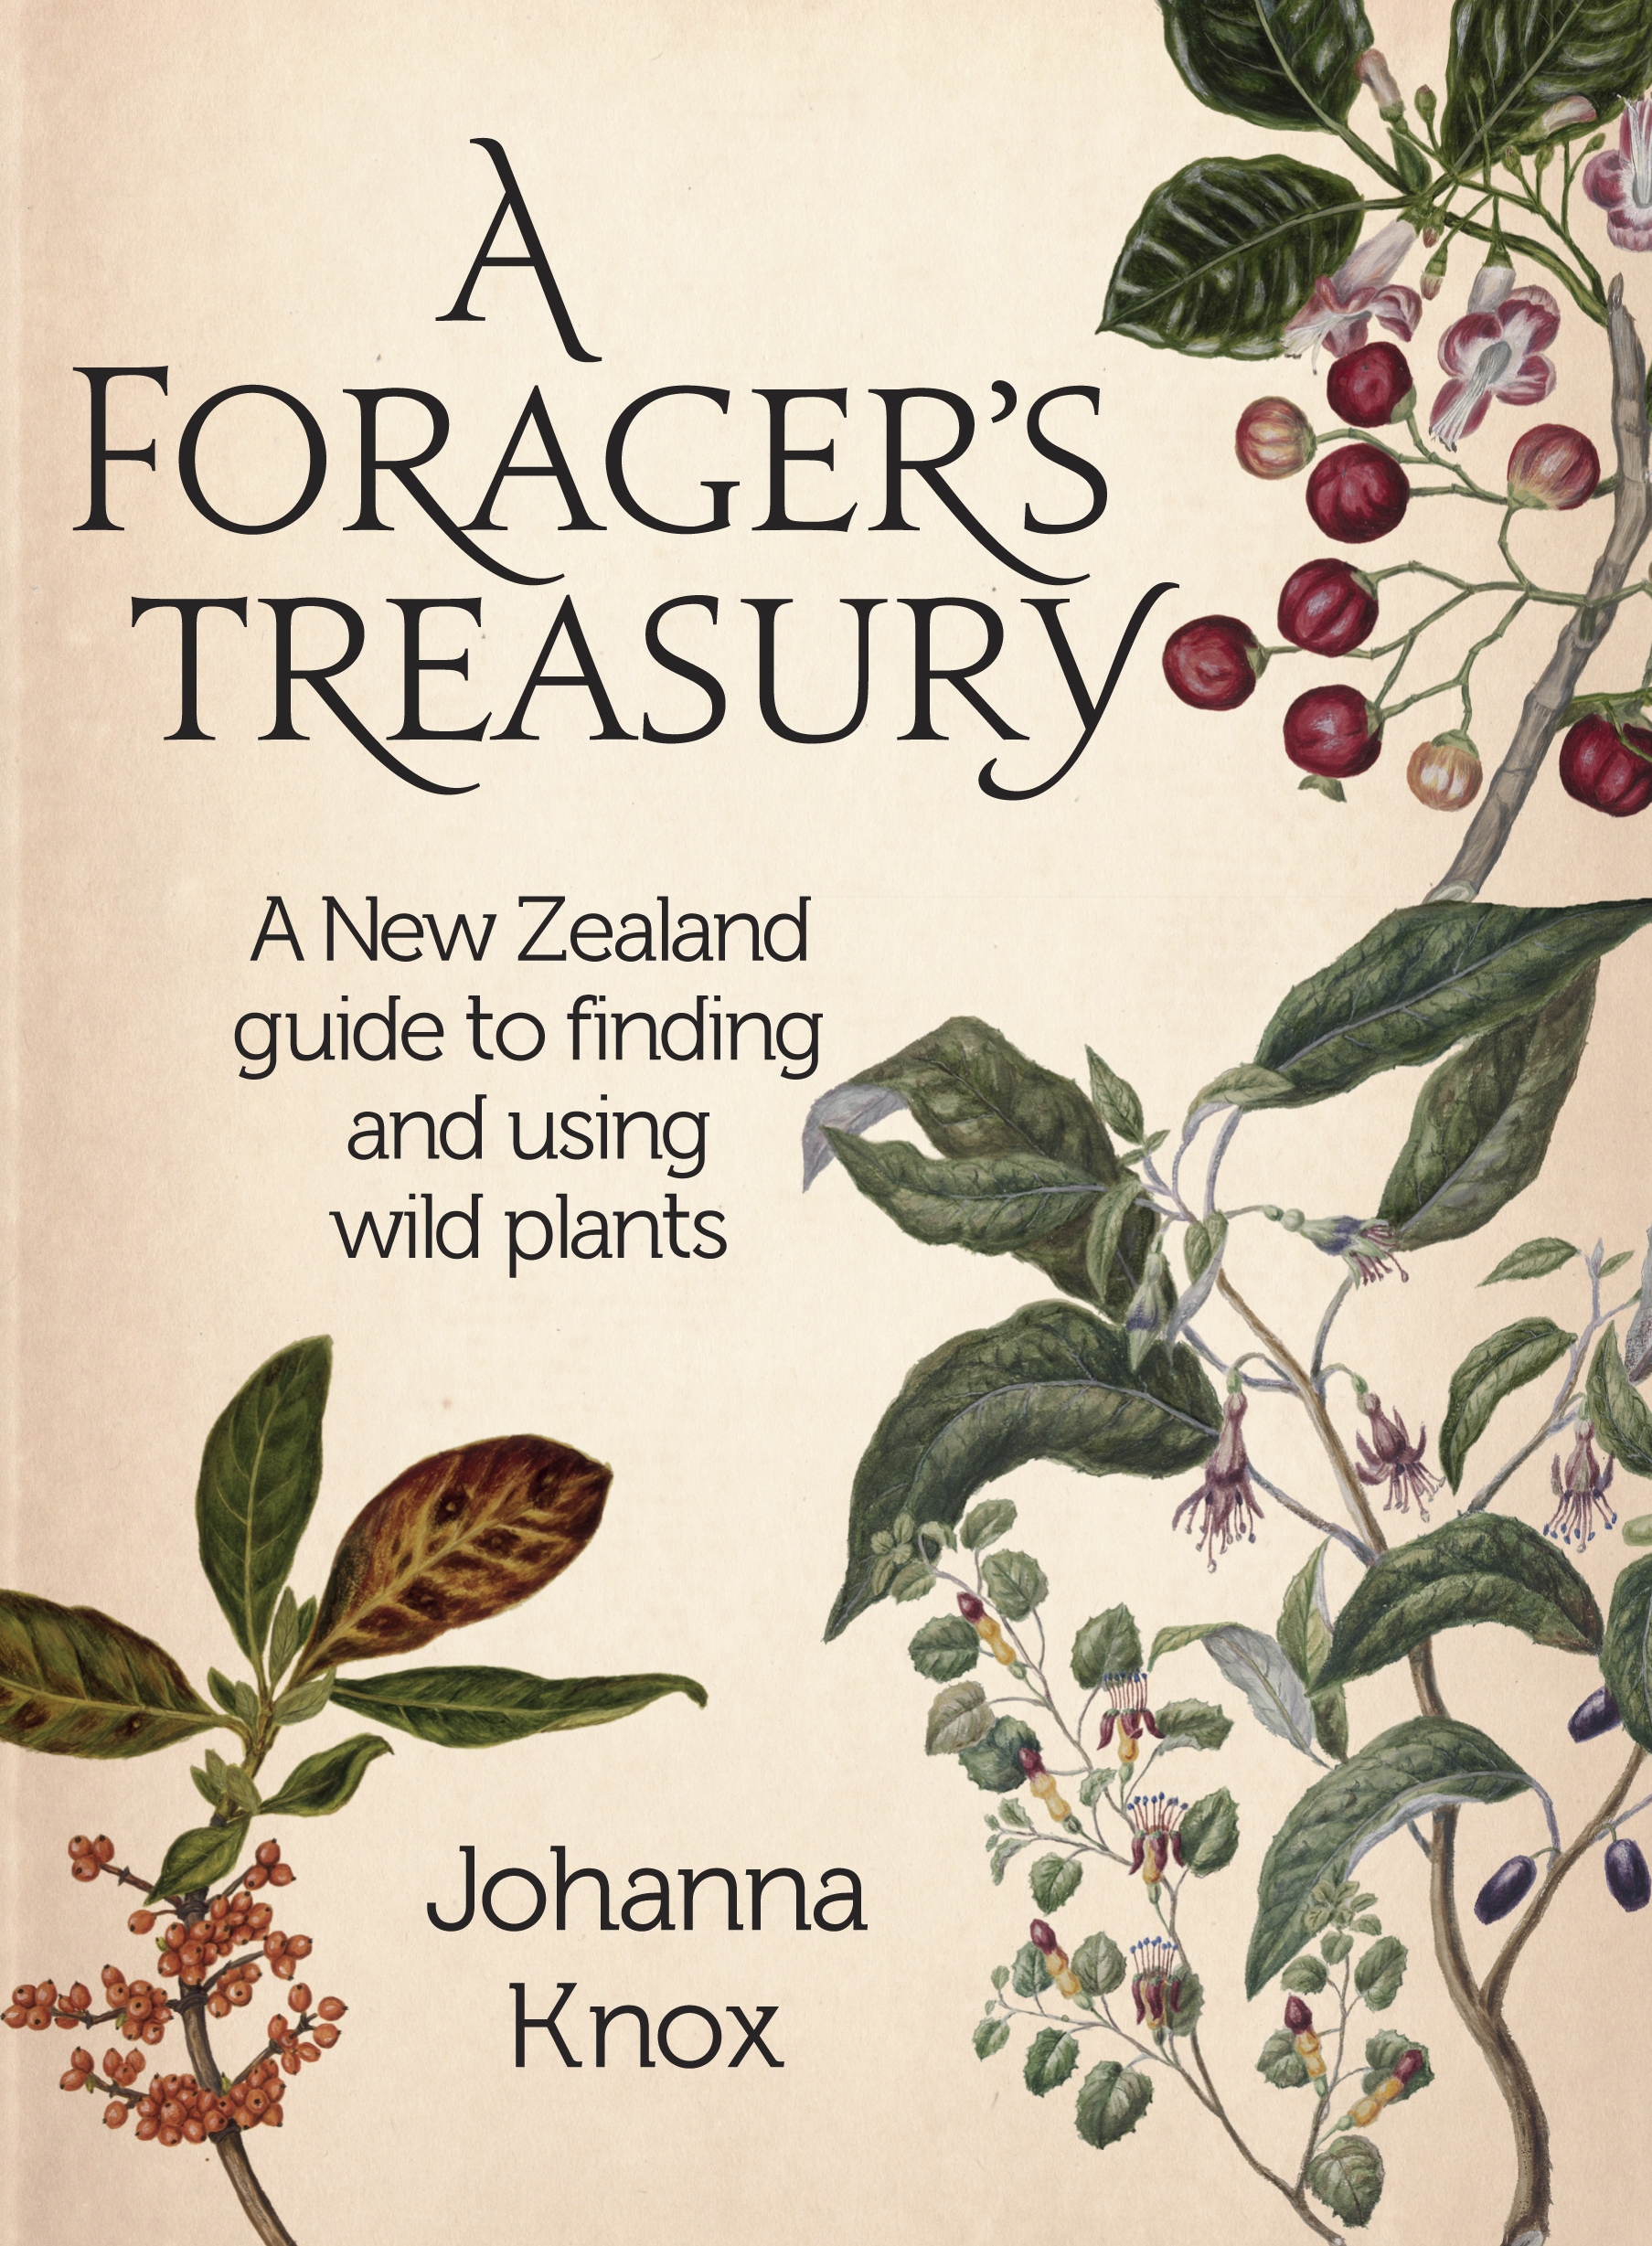 A forager’s treasury